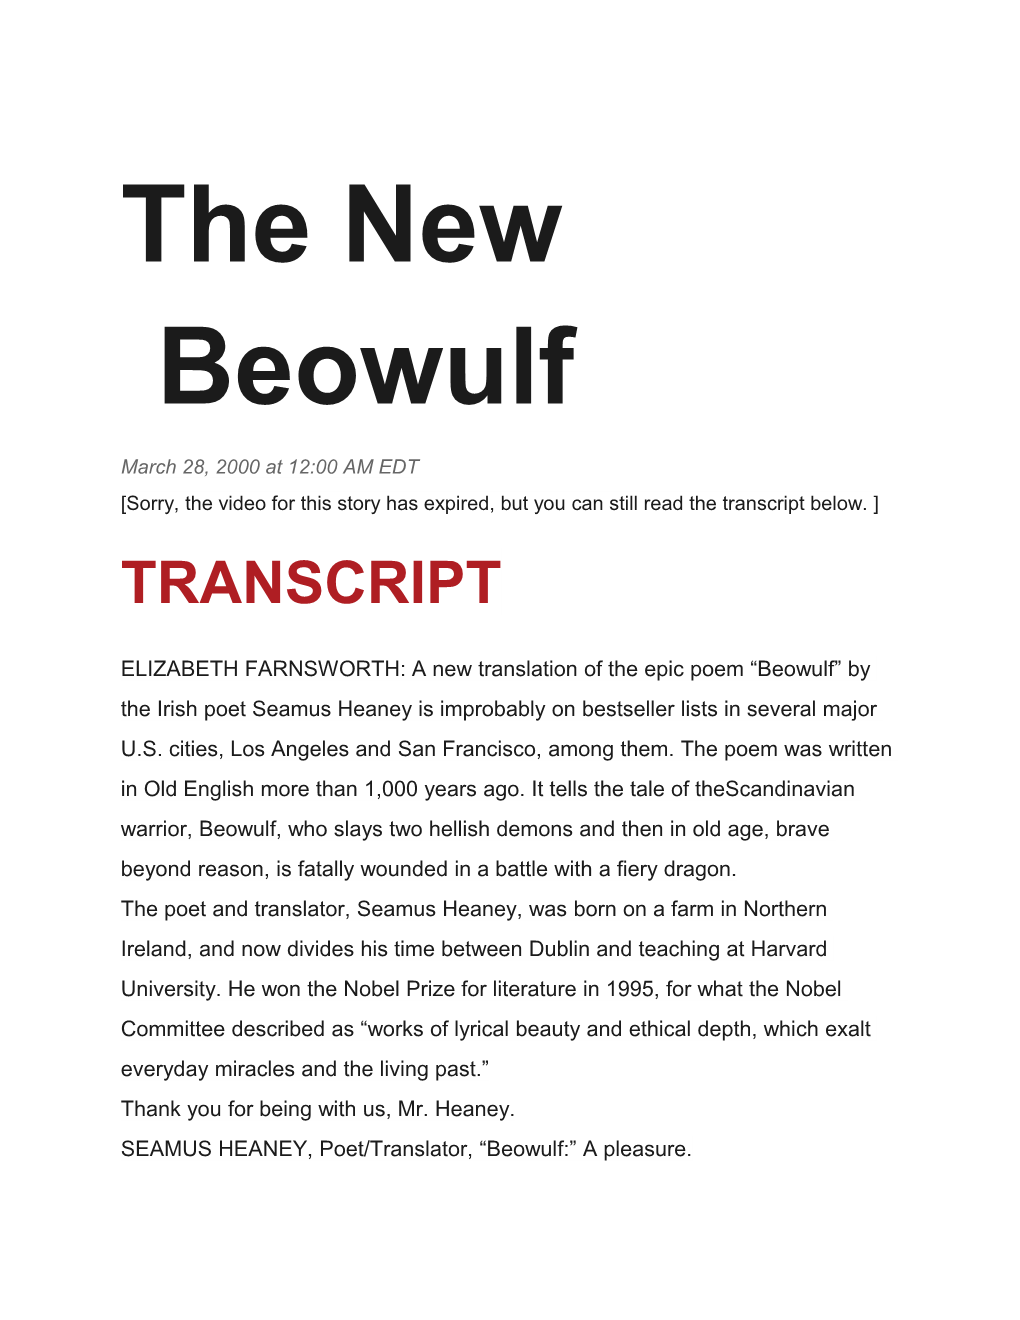 The New Beowulf